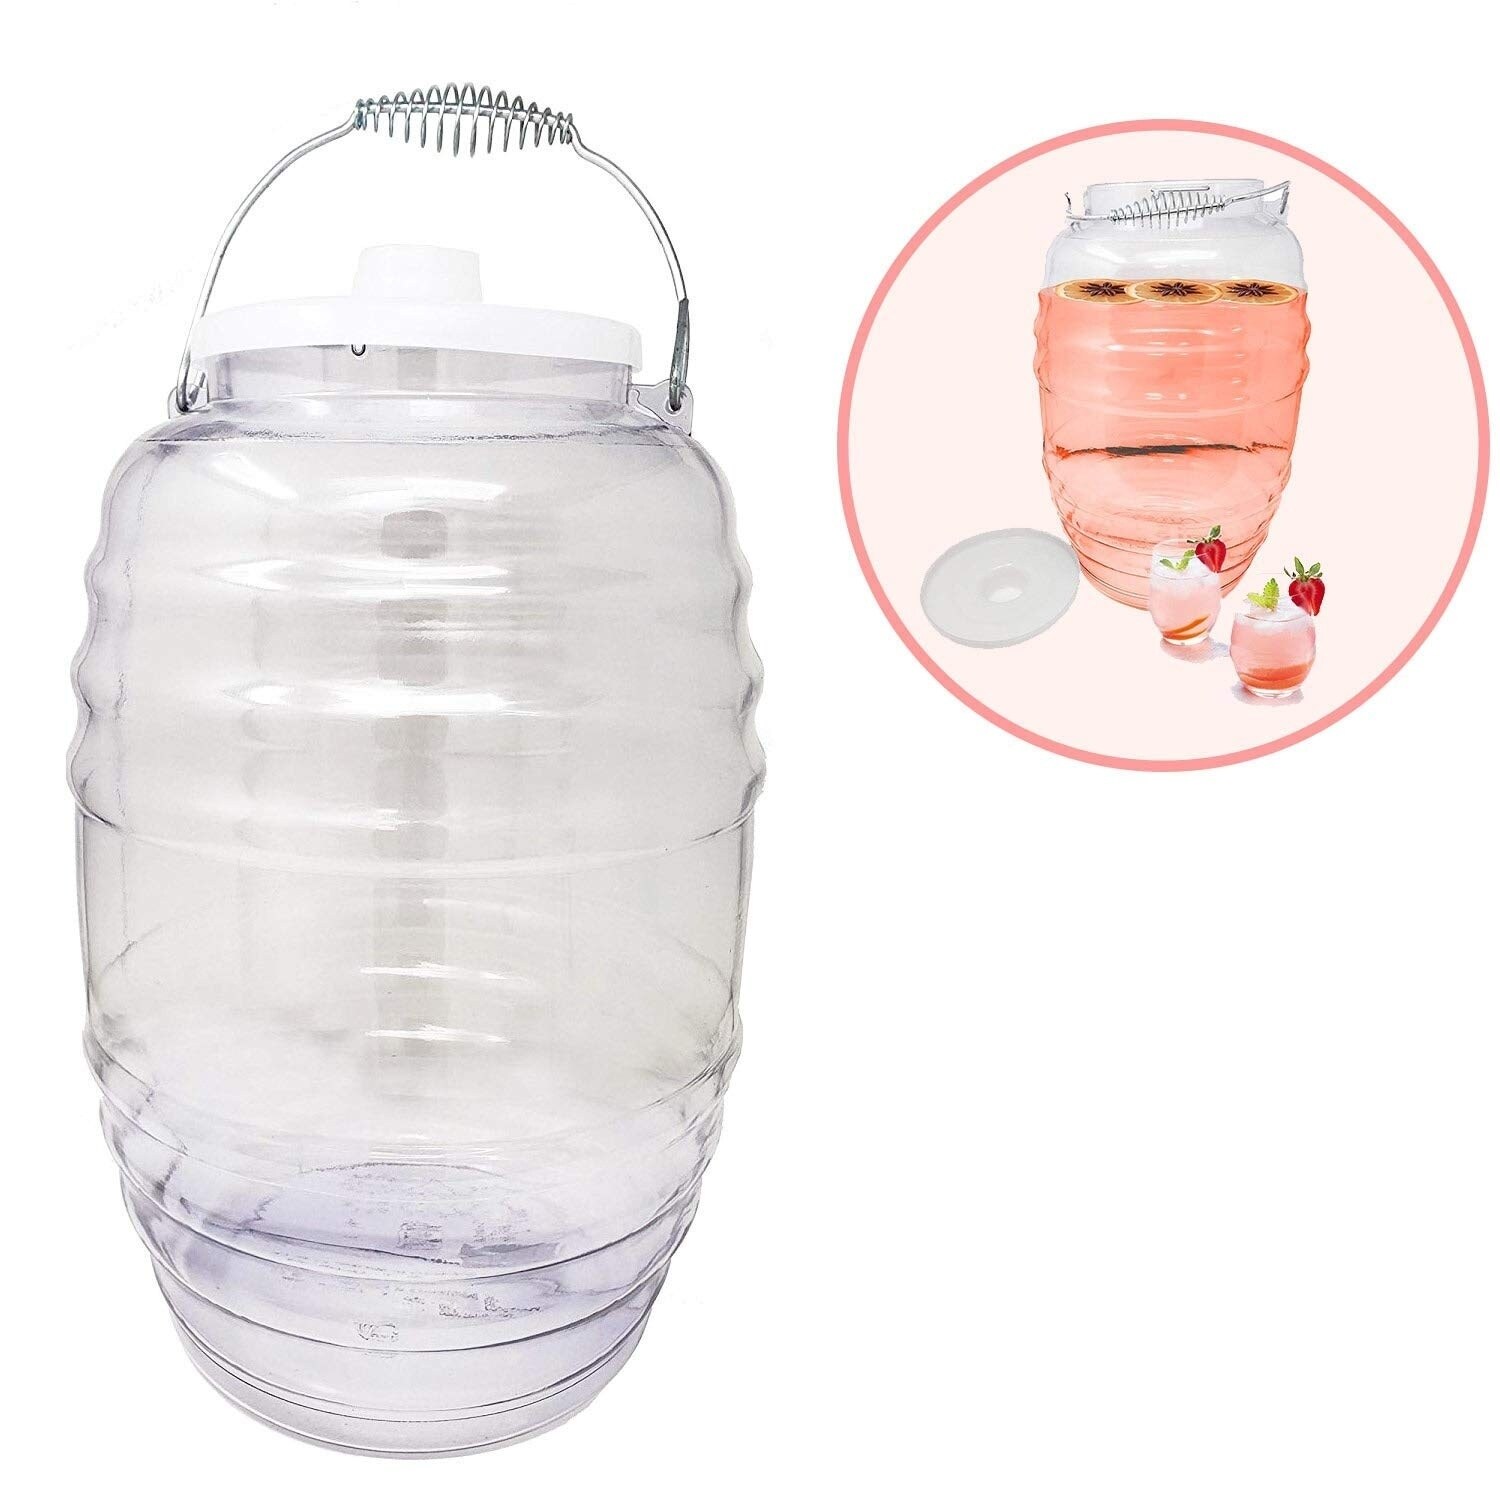 5 Gallon Vitrolero Jug with Lid - Aguas Frescas Plastic Water Container - Mexican Drink Dispenser - Ideal for Agua Fresca and Juice - BPA Free, Size